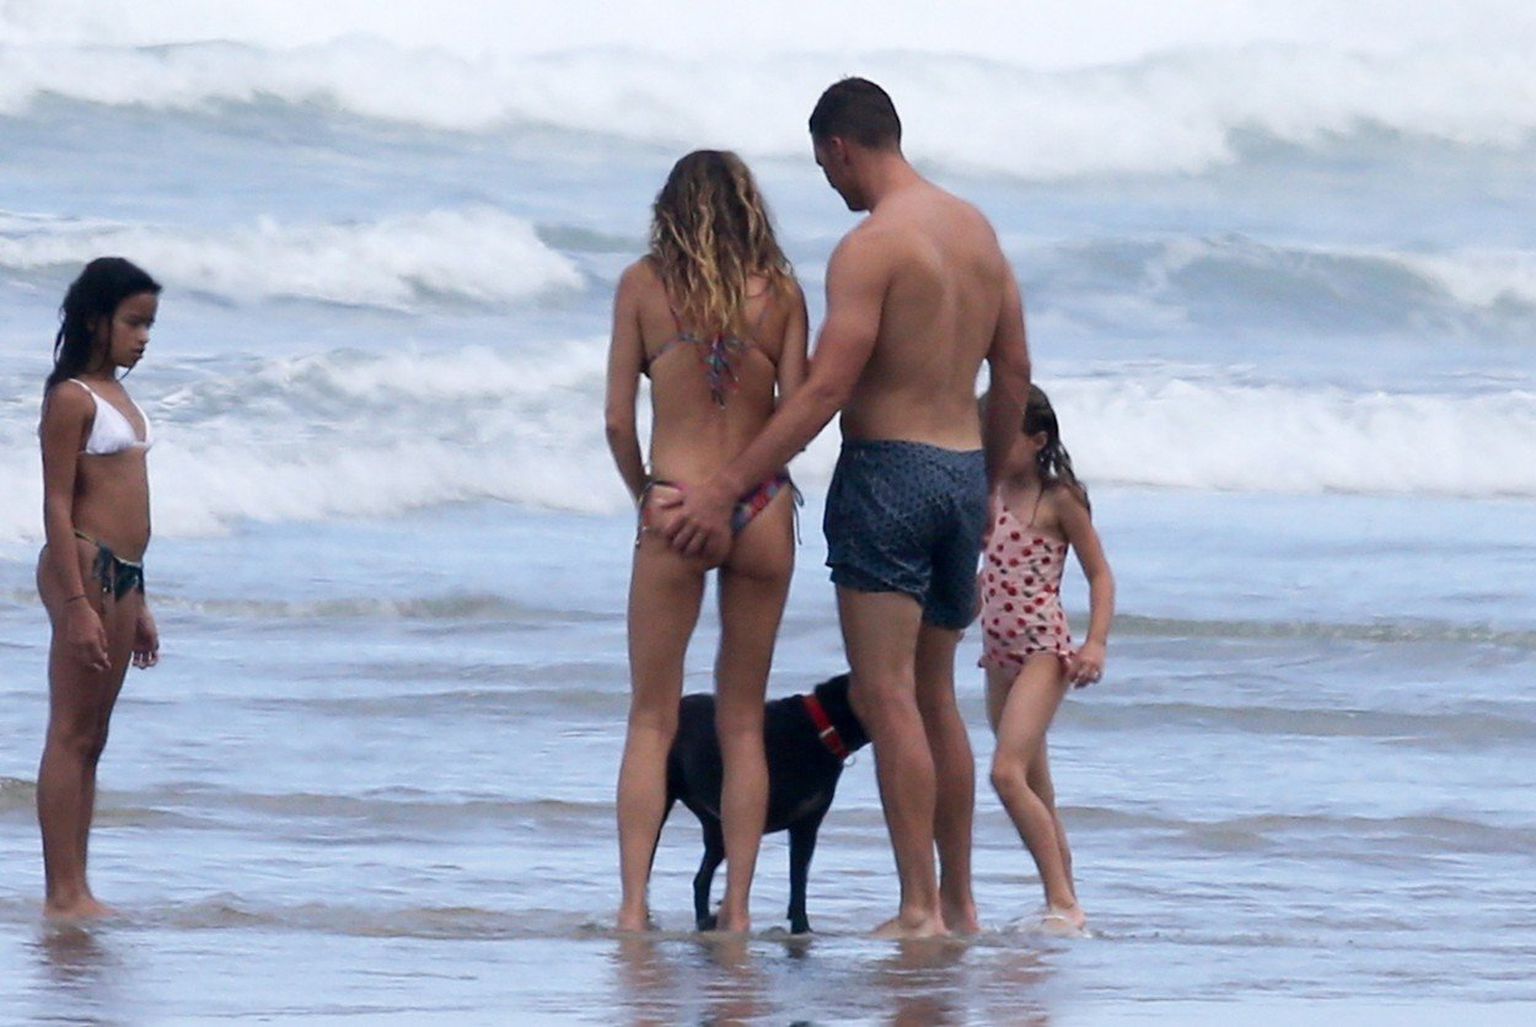 Tom Brady's Nudes With Gisele On Vacation Leaked.